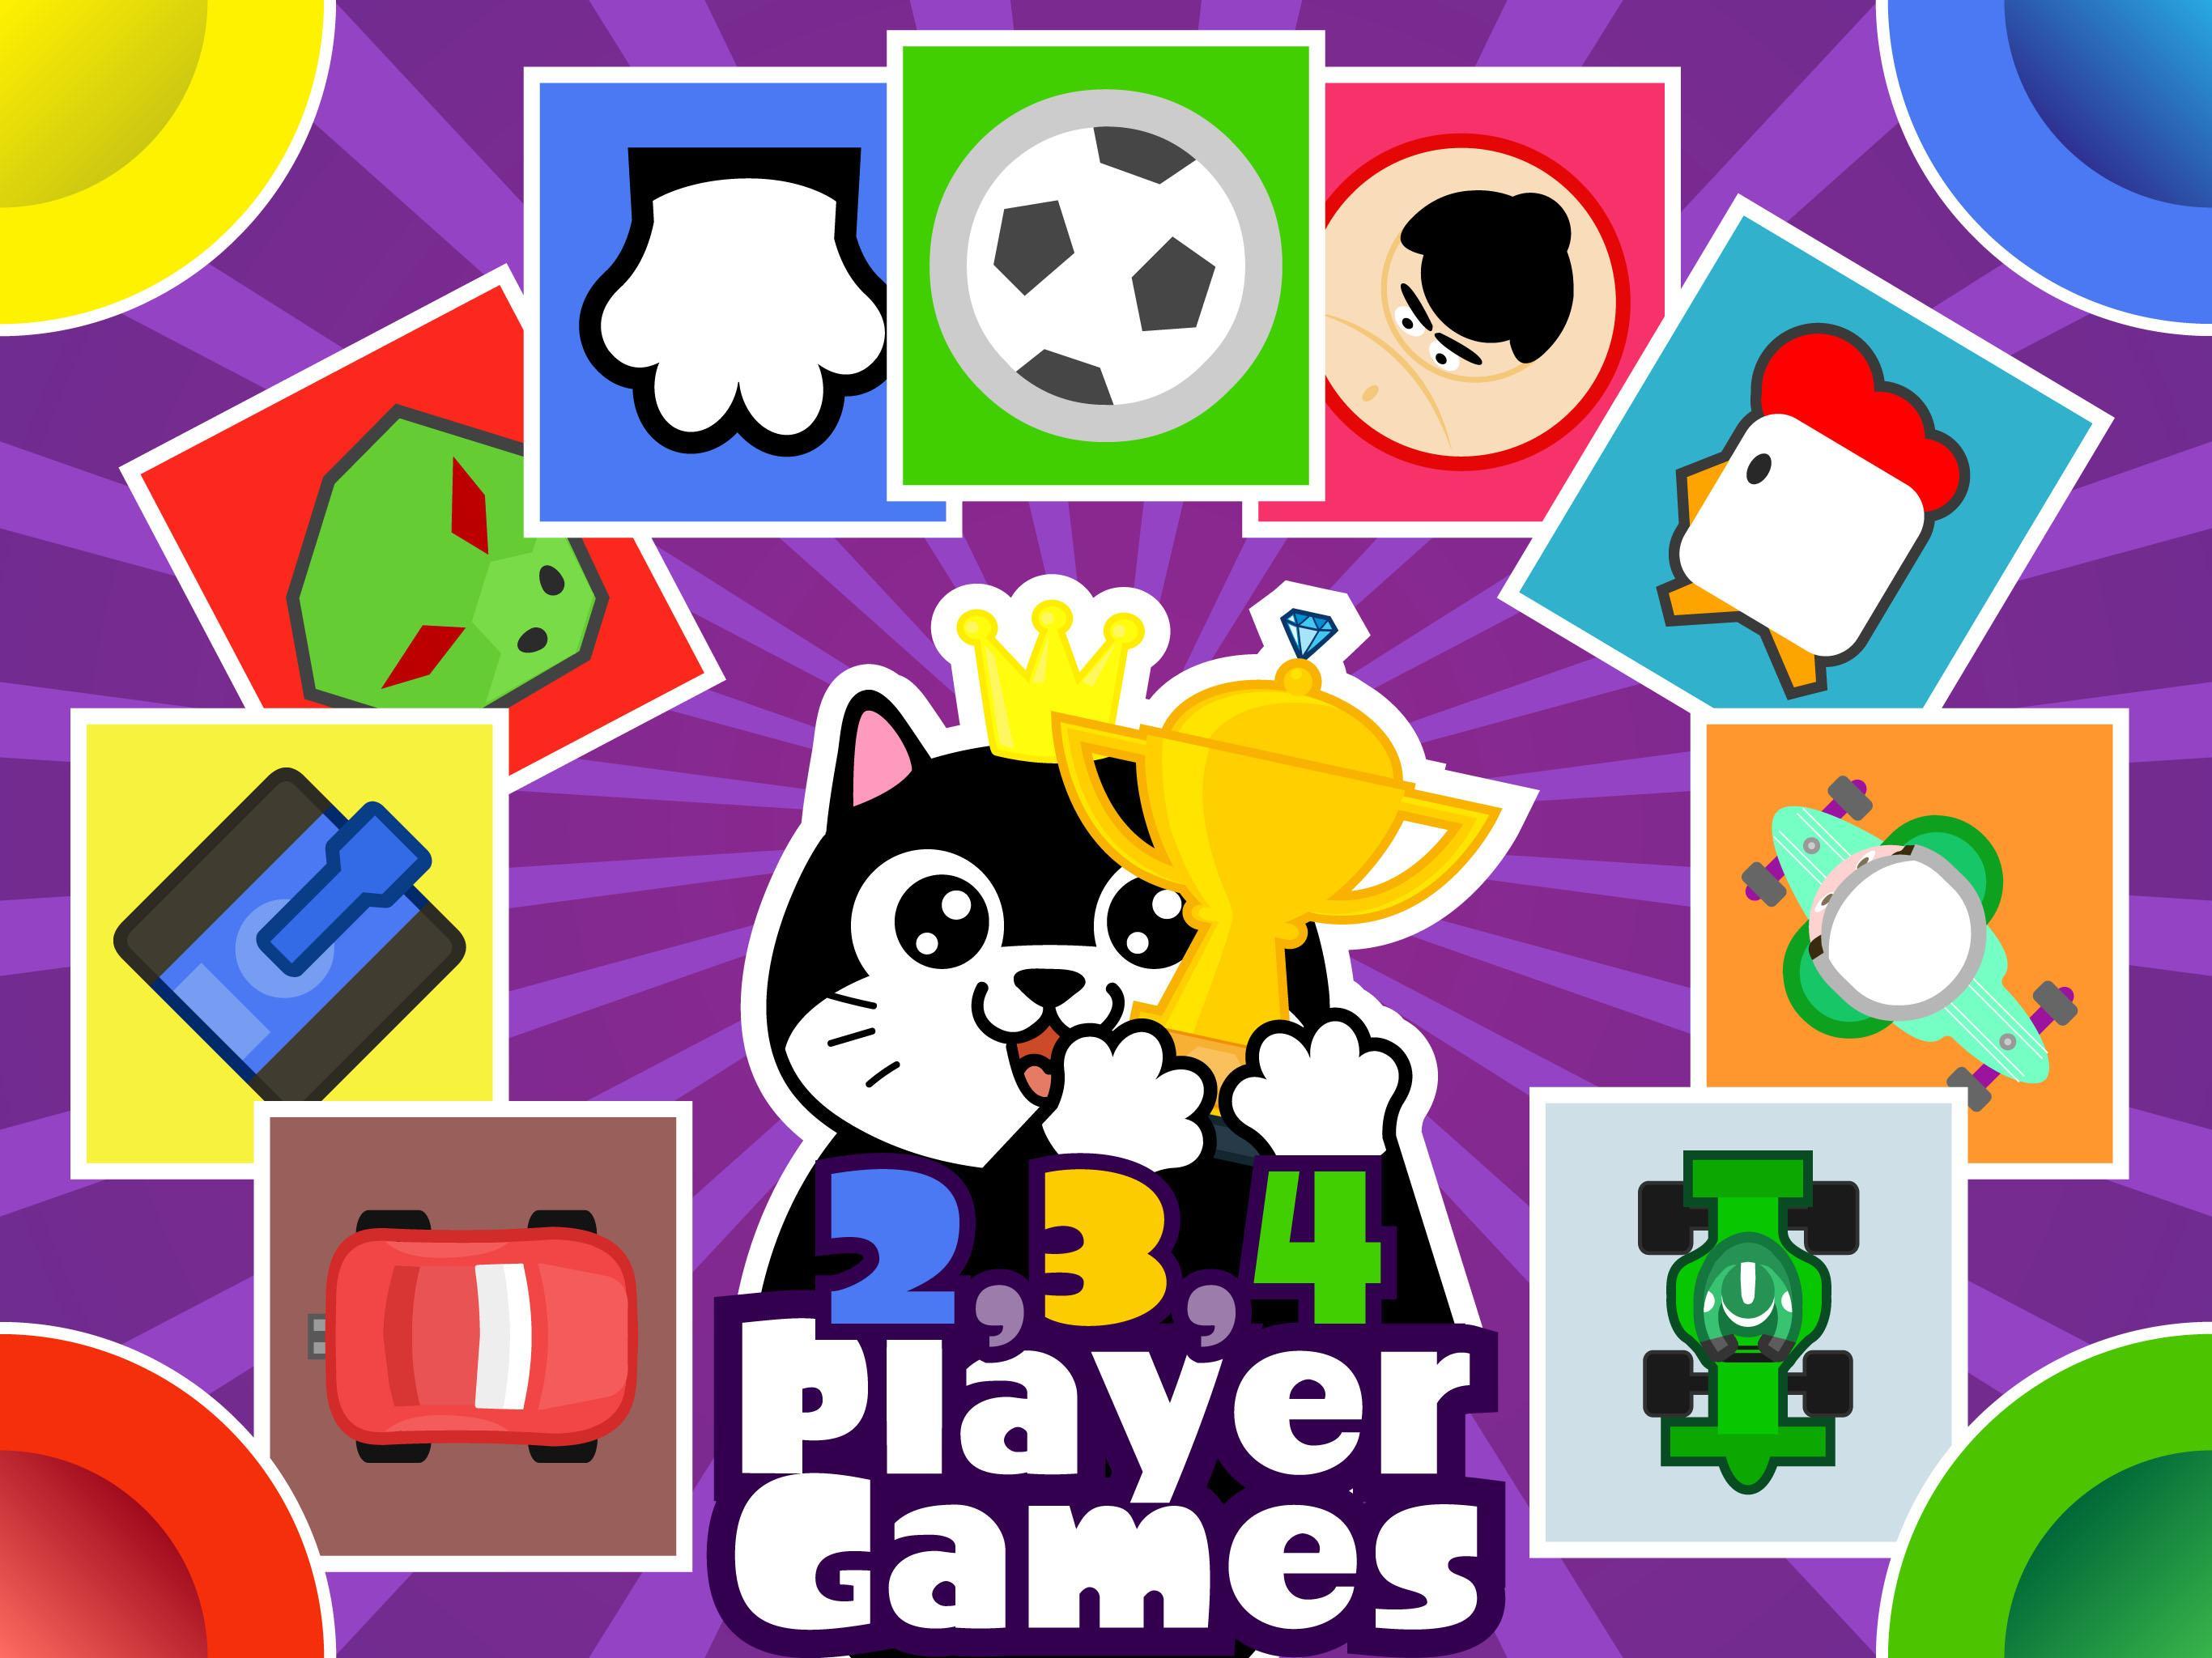 Ipack 2 3 4 player games pc